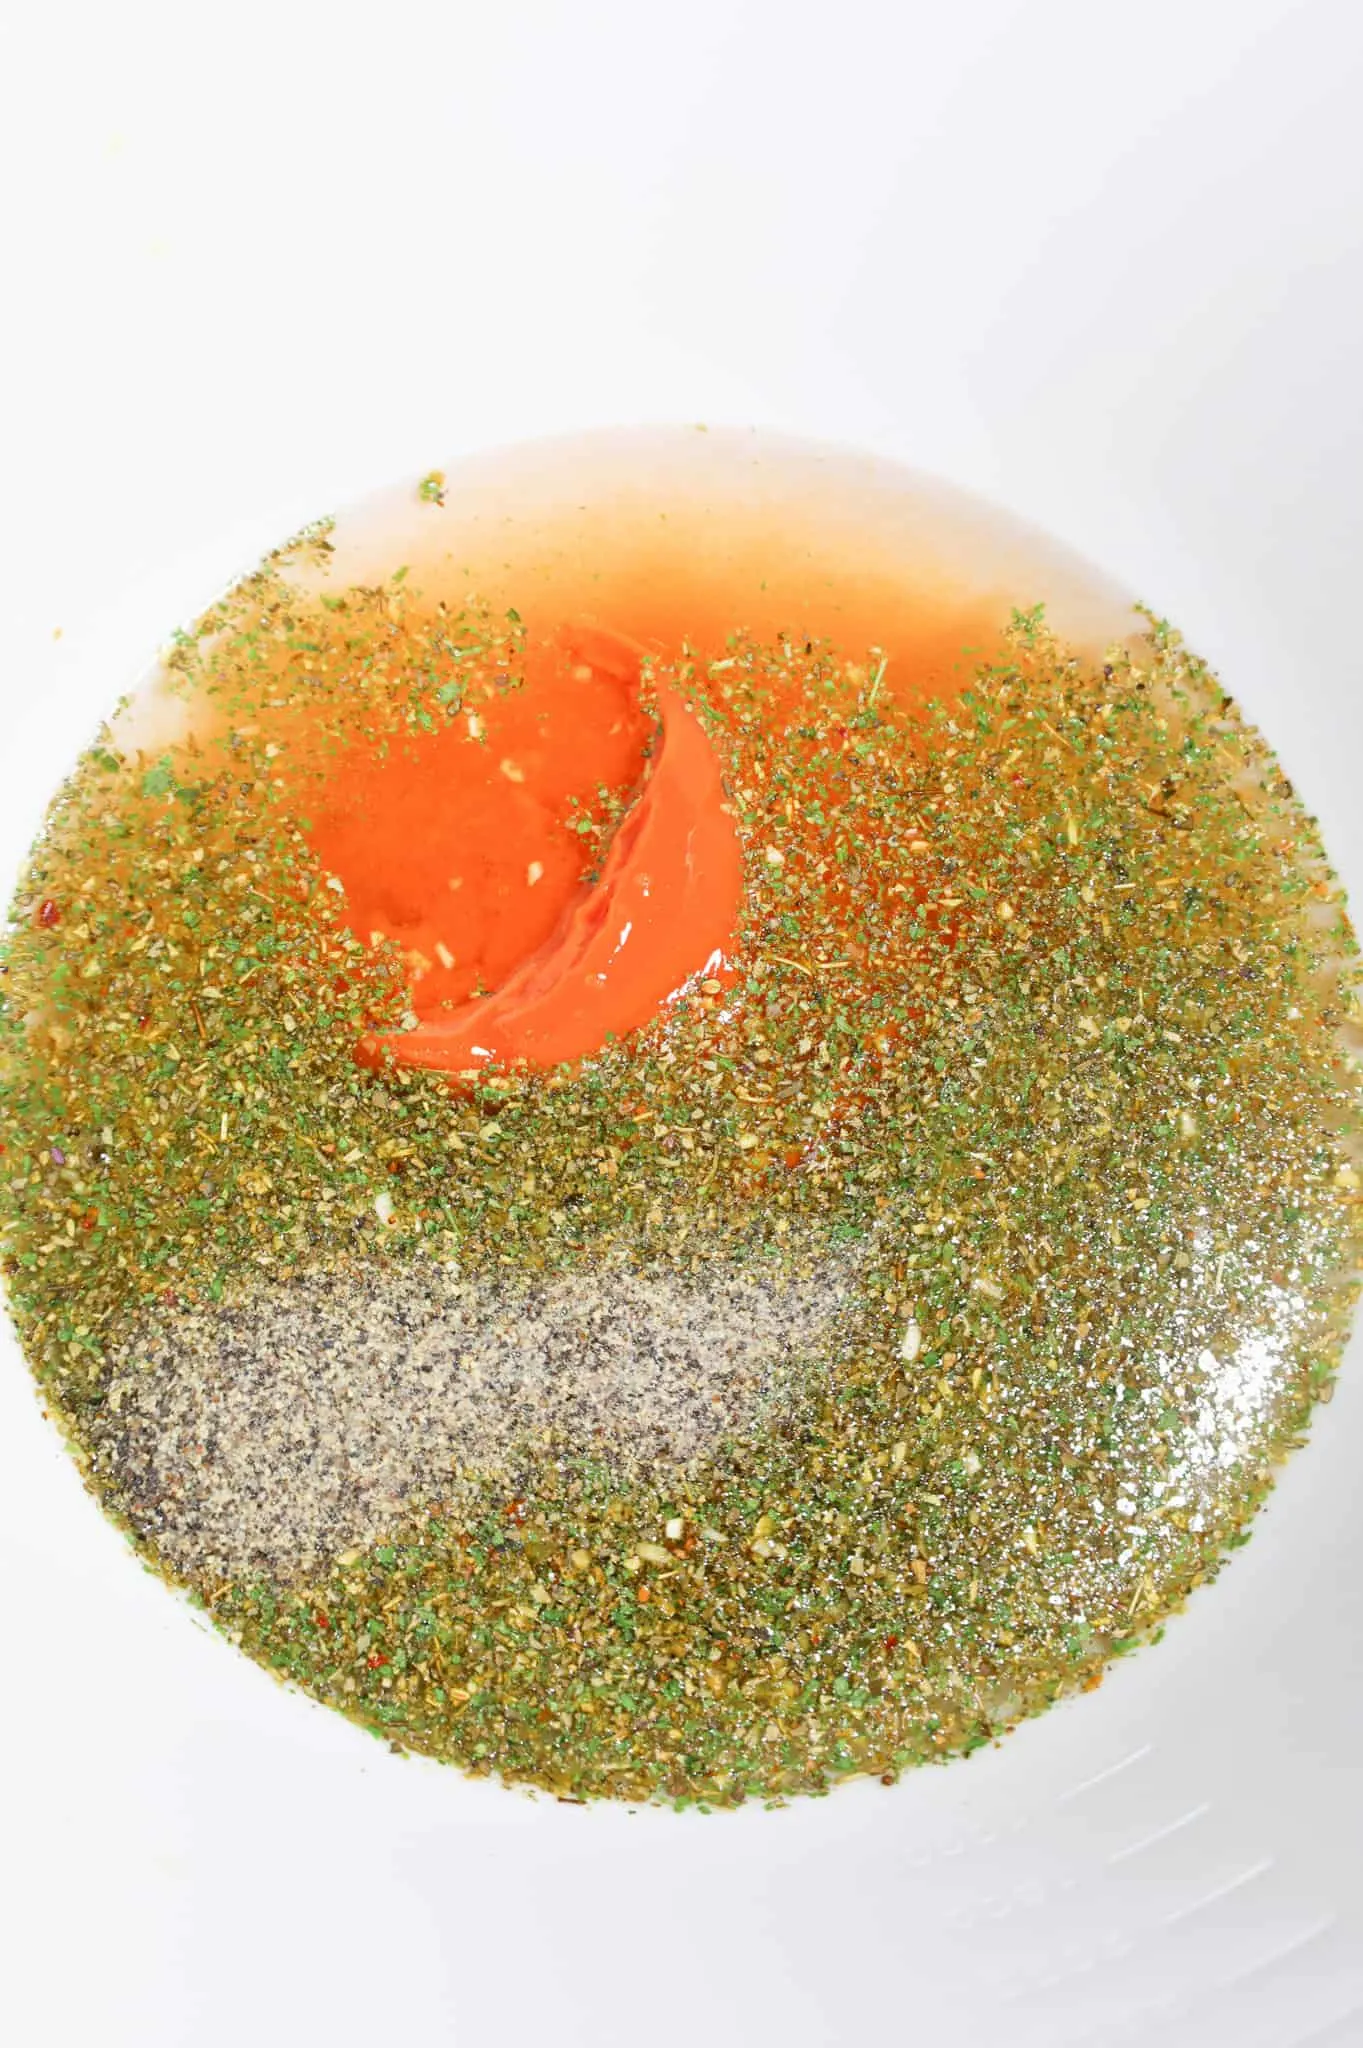 Italian seasoning, water and condensed tomato soup in a mixing bowl